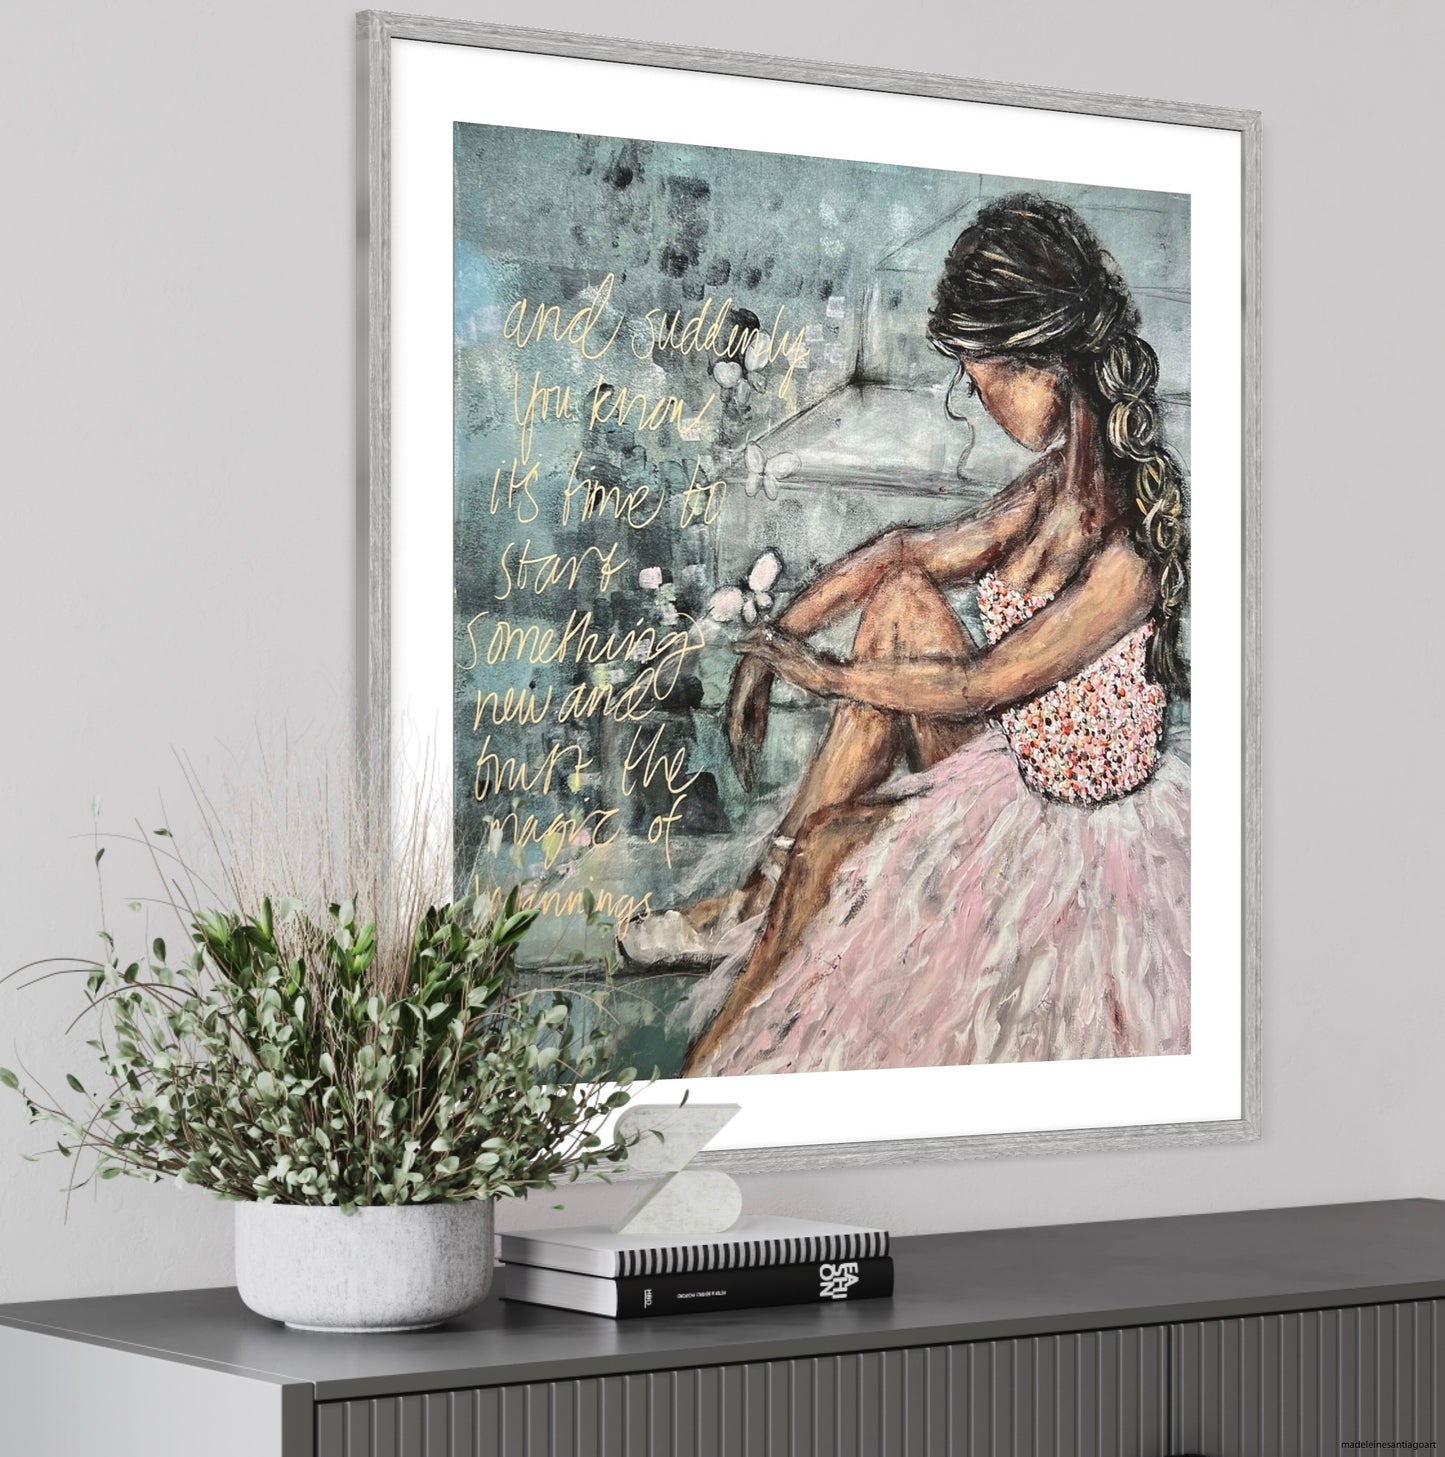 FINE ART PRINT - AND SUDDENLY YOU KNOW